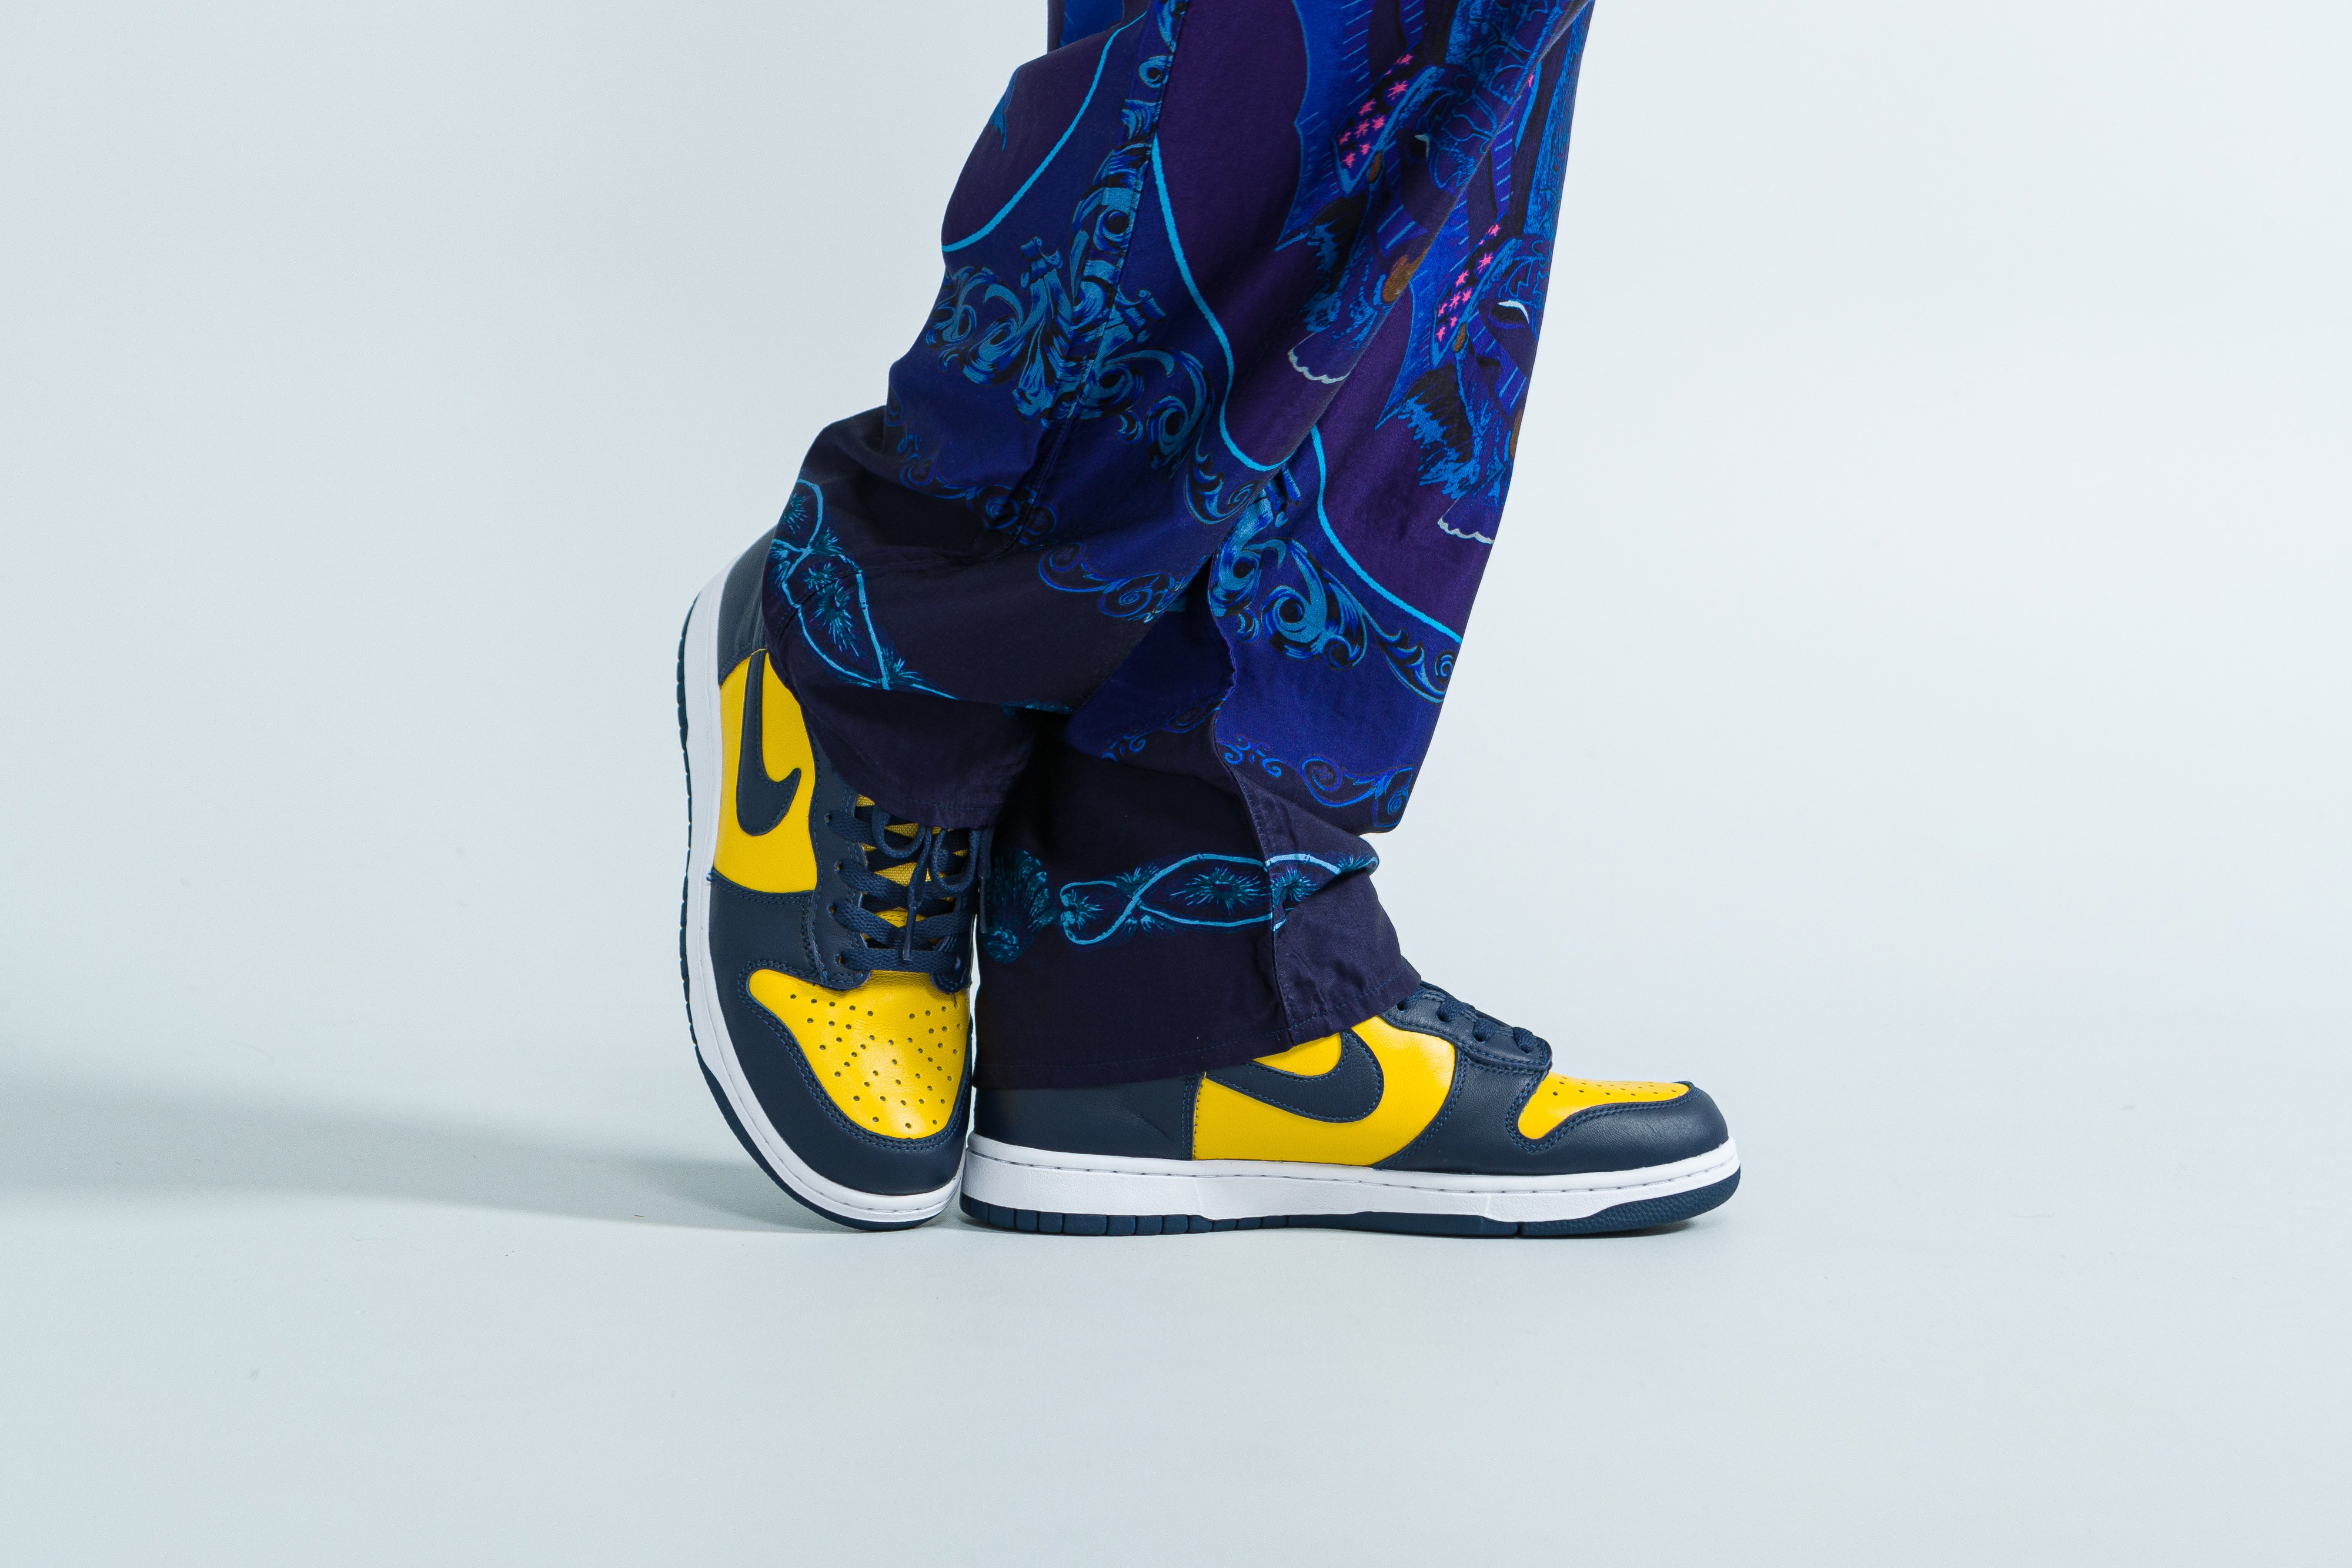 Nike - Dunk High SP - Varsity Maize/Midnight Navy - Up There